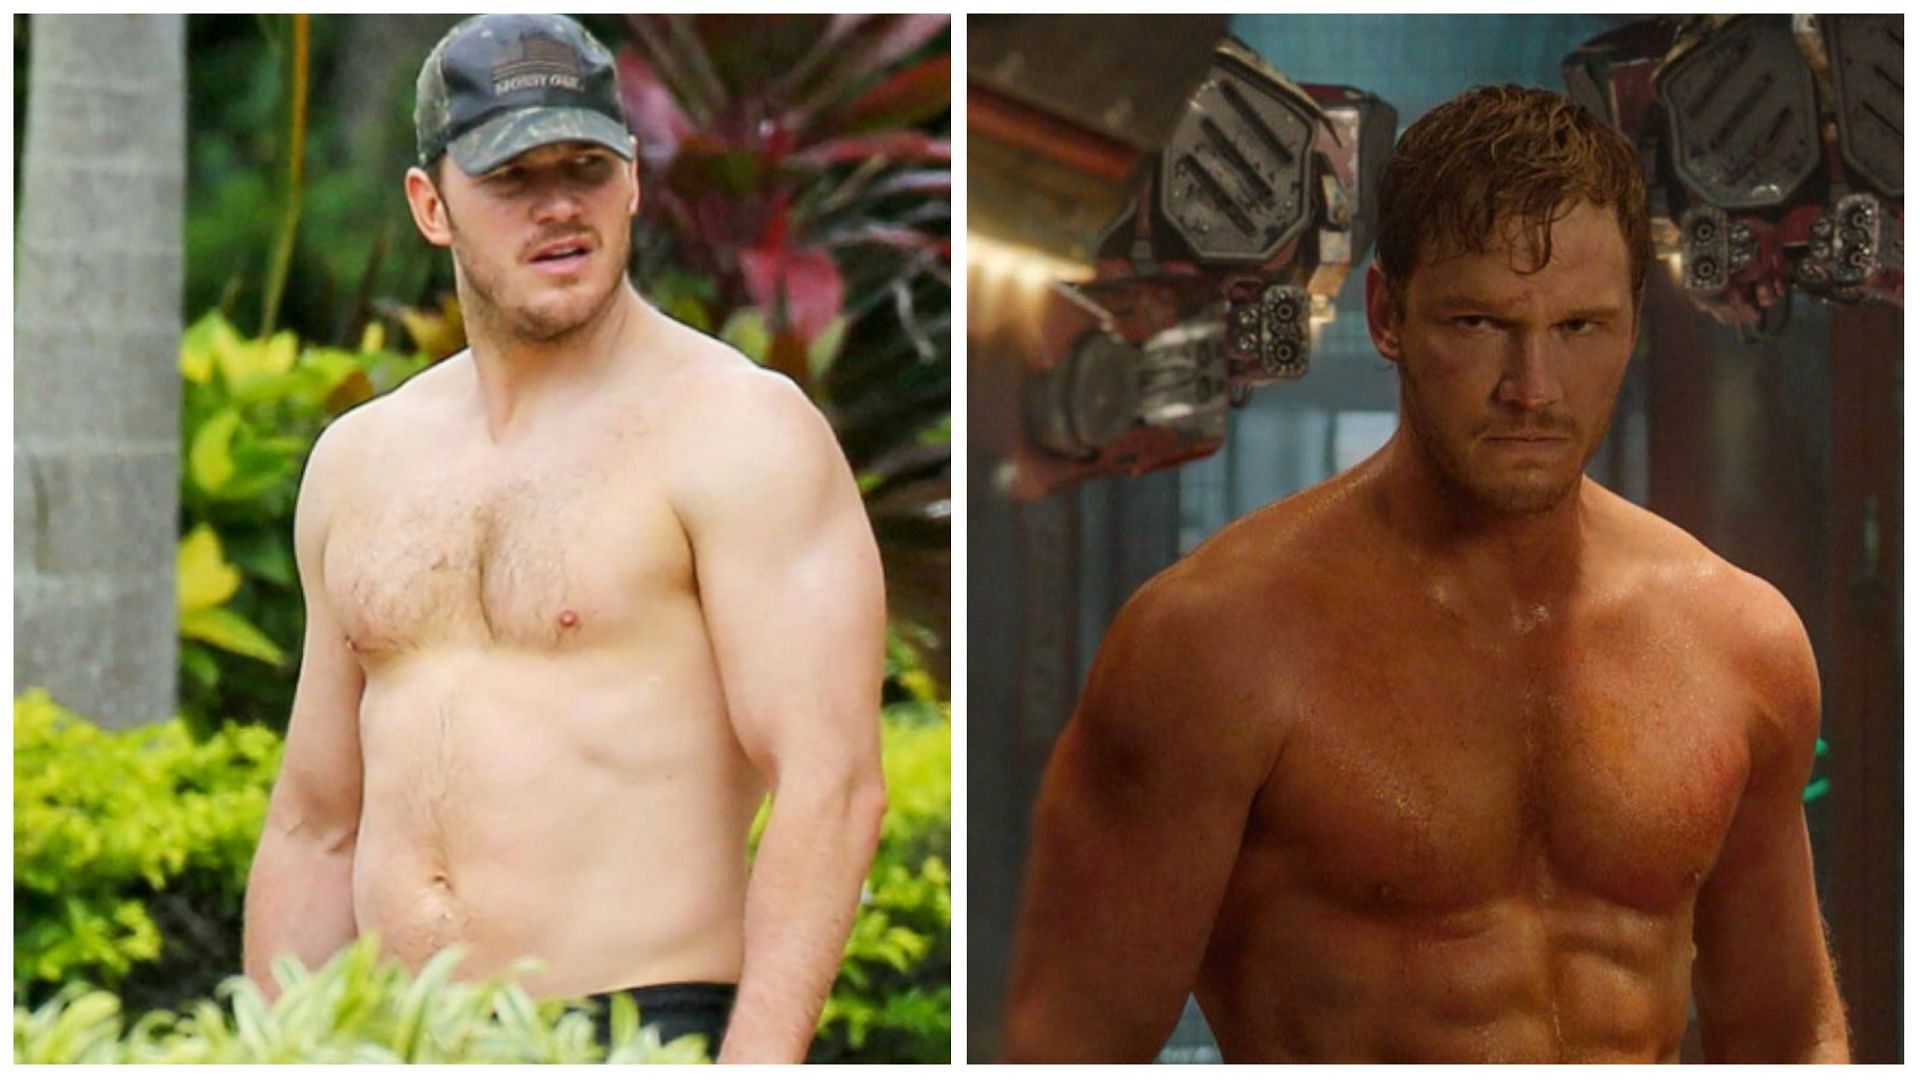 Chris Pratt consumed leafy green salads, protein shakes, and cutting out all alcohol. (Image via Instagram @chrisprattmyman )